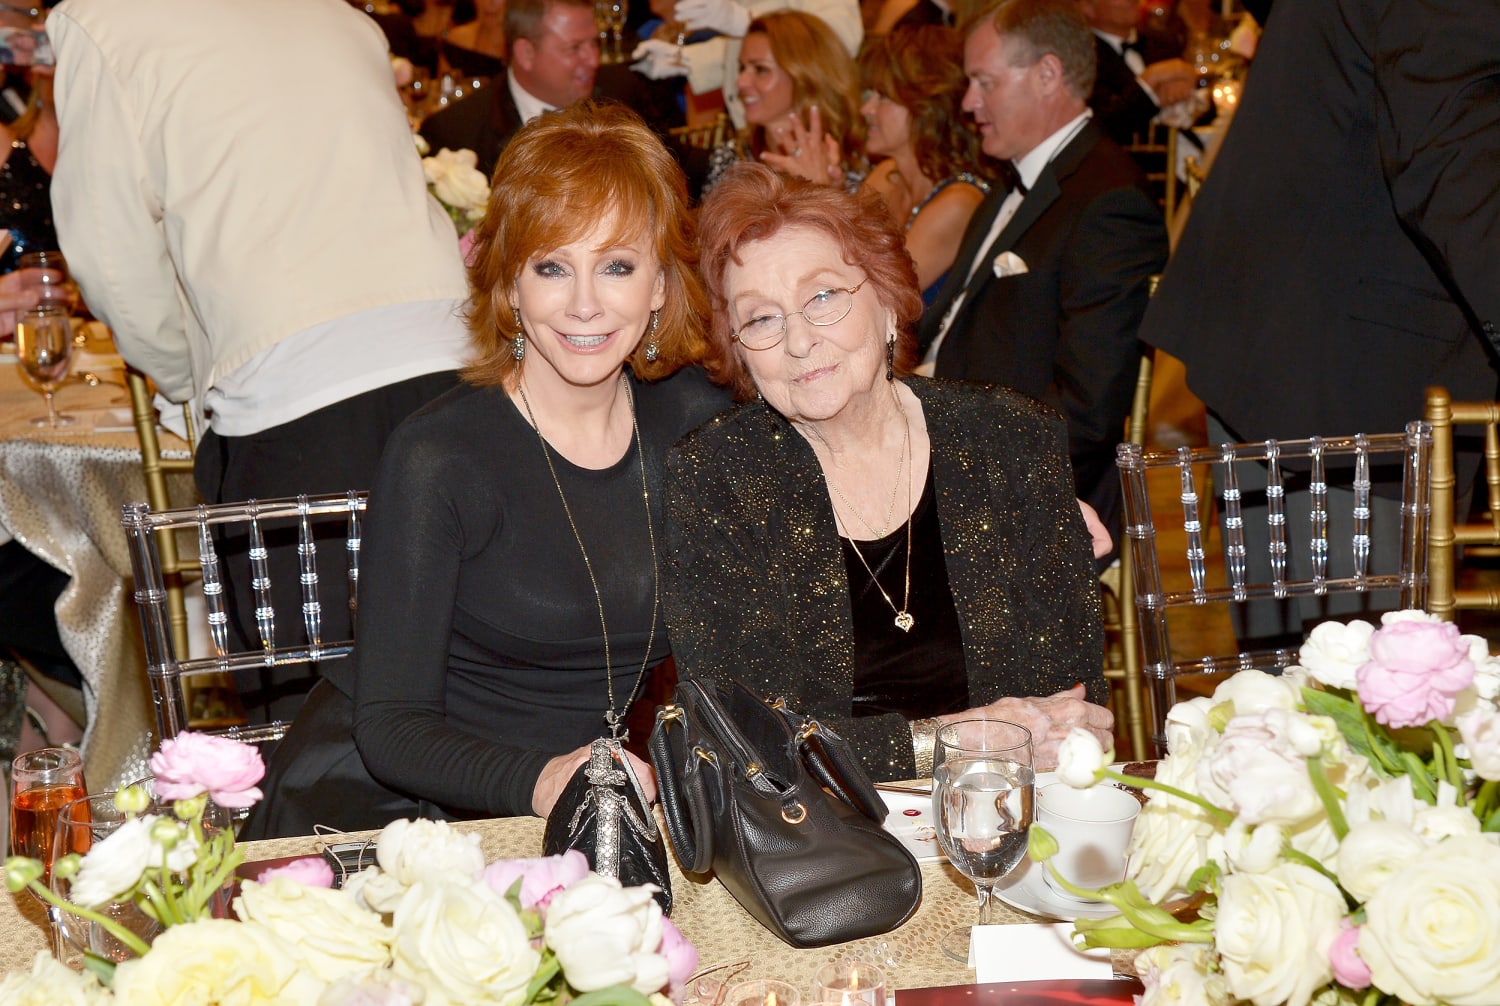 Reba McEntire reveals she almost quit singing after her mother died